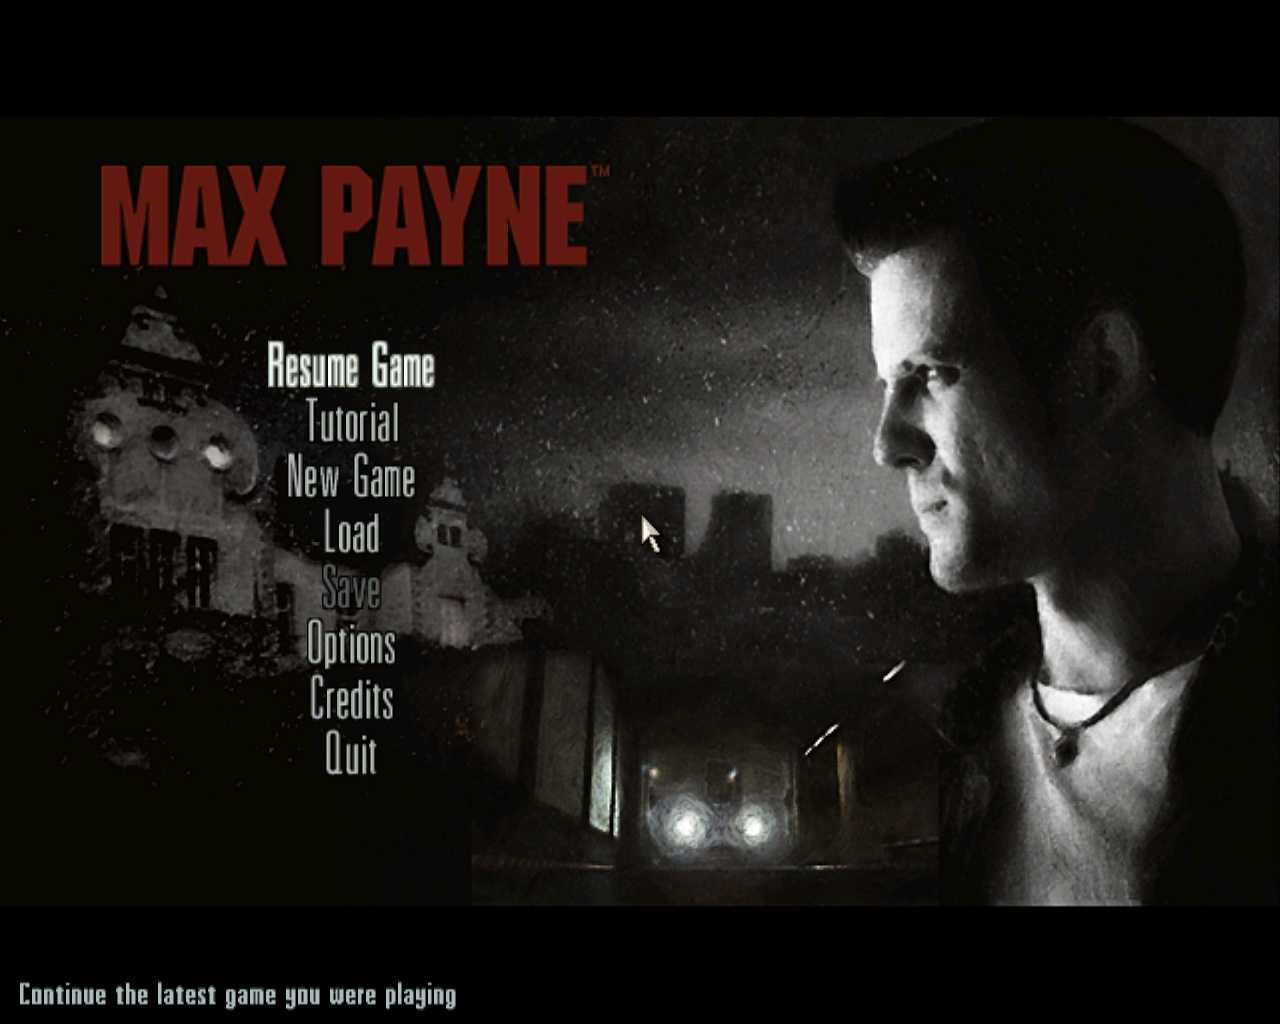 Download Max Payne for free, support Windows 10, high speed link. Check now 1_resu10